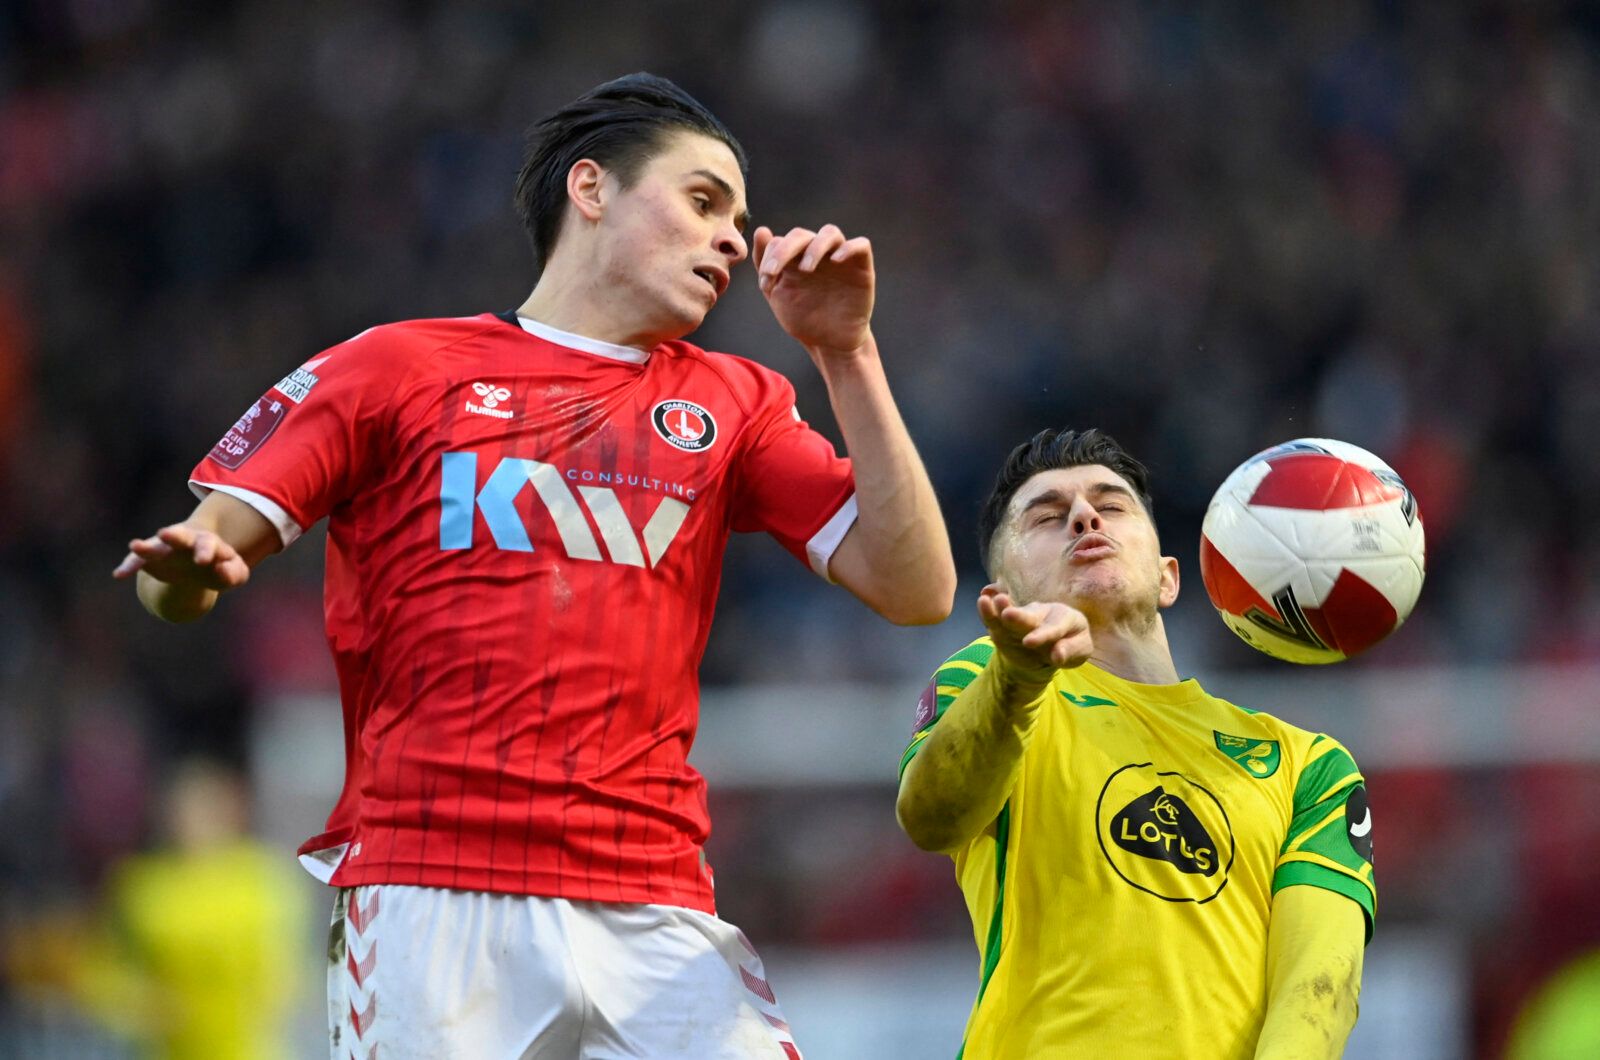 Soccer Football - FA Cup Third Round - Charlton Athletic v Norwich City - The Valley, London, Britain - January 9, 2022 Charlton Athletic's George Dobson in action with Norwich City's Milot Rashica REUTERS/Tony Obrien